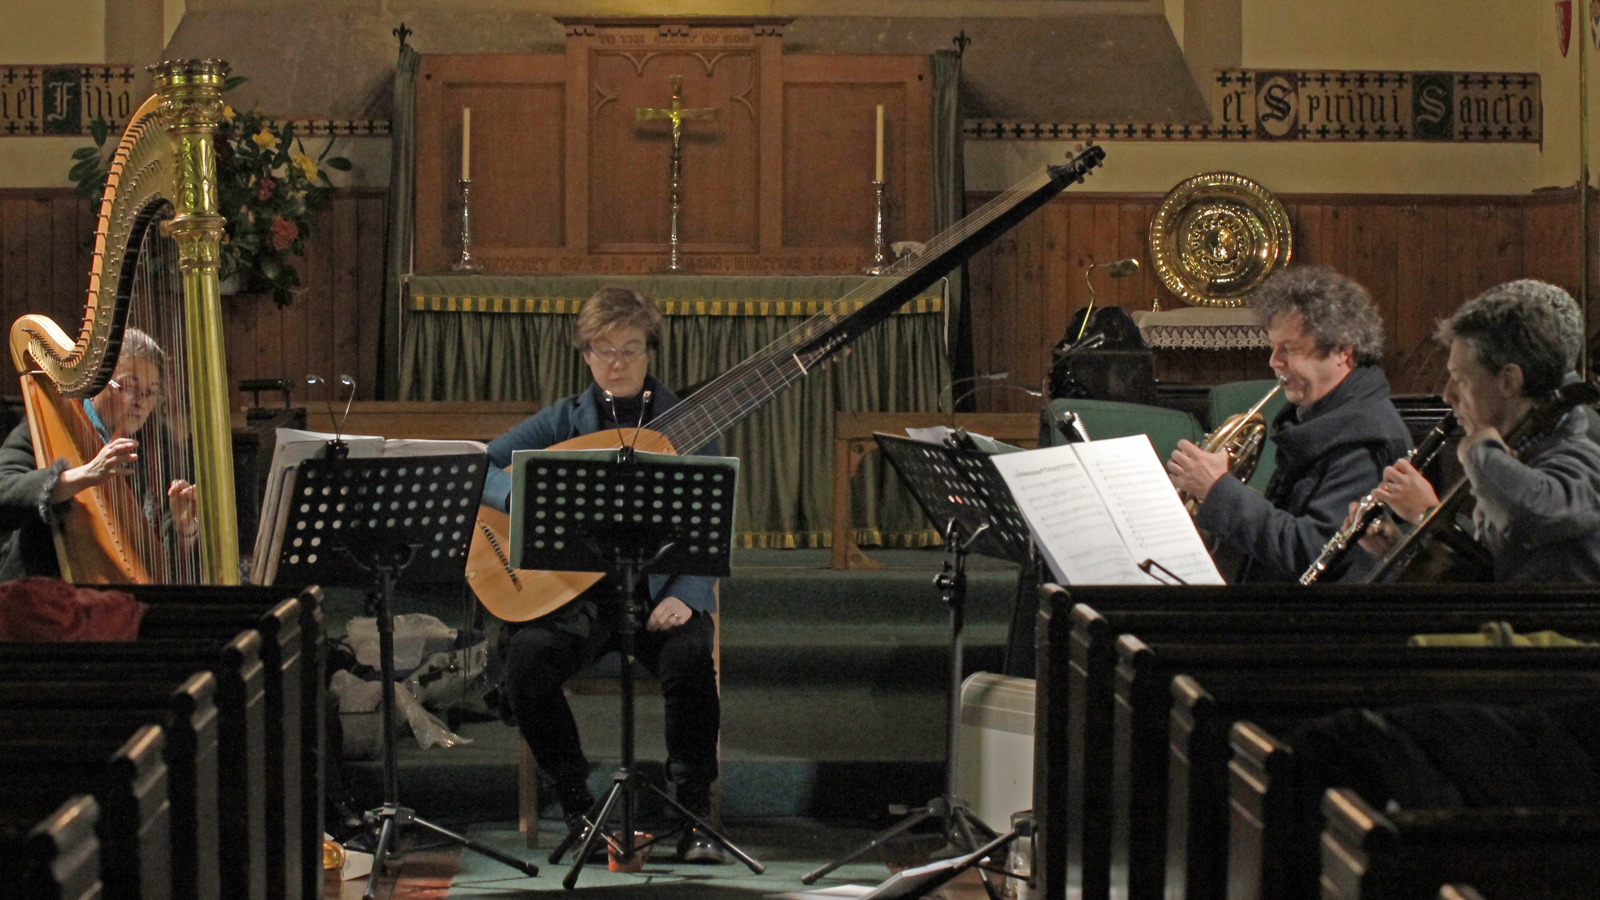 Hebrides Ensemble spent three days rehearsing in St Vincent's at the end of November 2015.